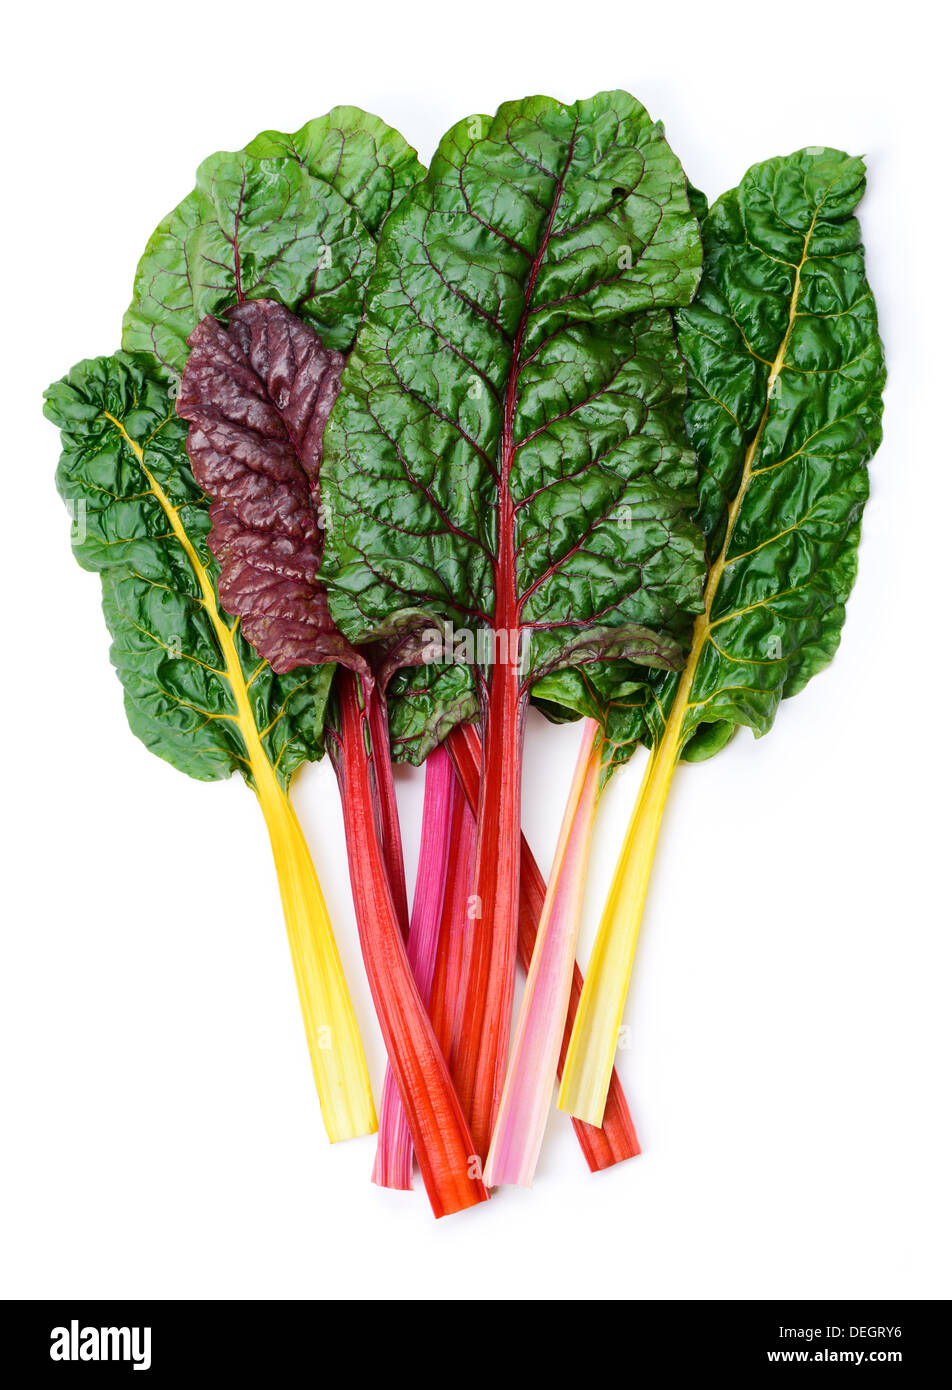 Mangold or Swiss chard 'Rainbow' leaves isolated on white Stock Photo